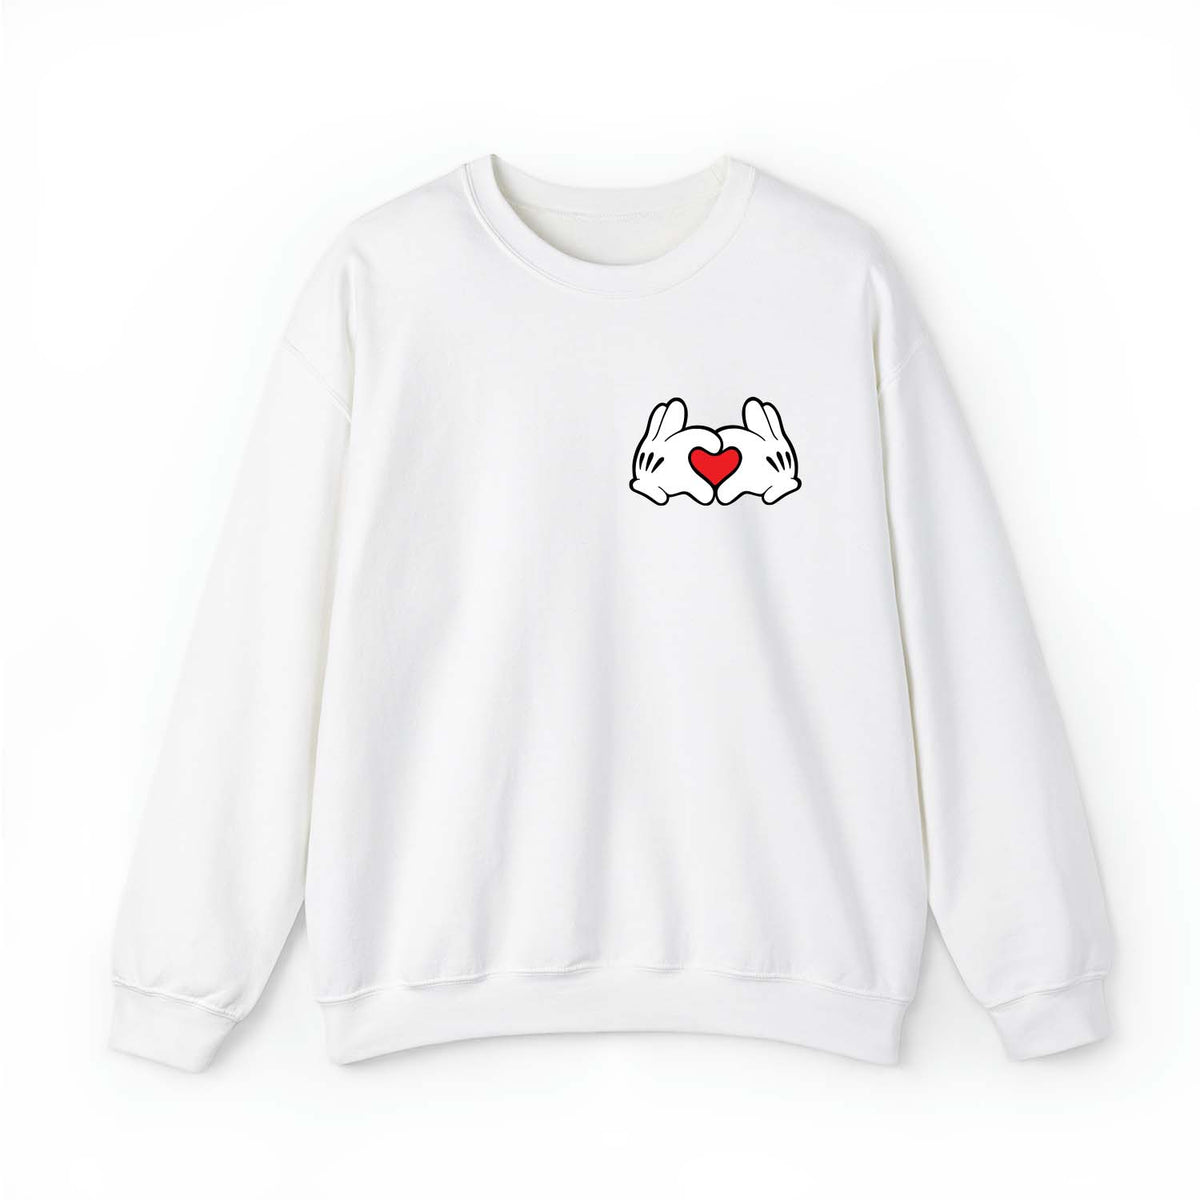 white-sweatshirt-with-pocket-size-mickey-sign-heart